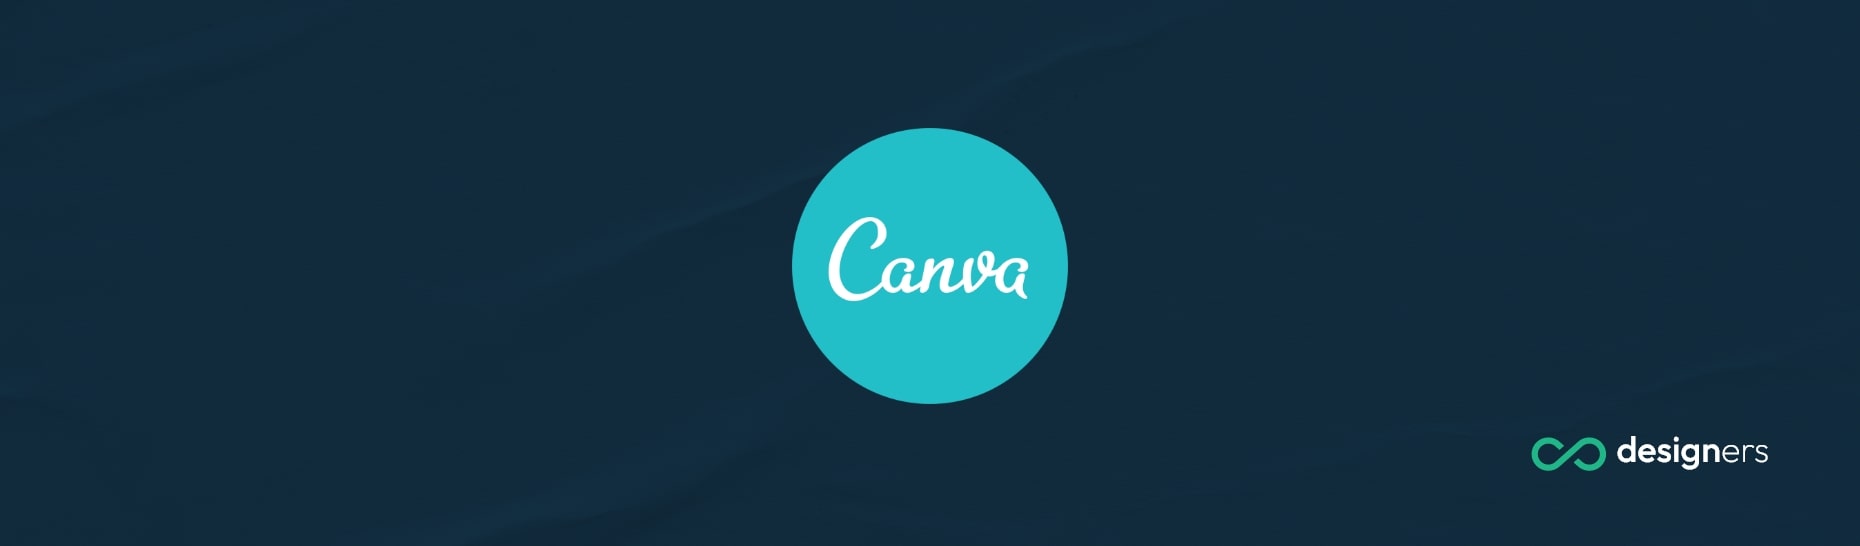 Is Canva Part of Amazon?